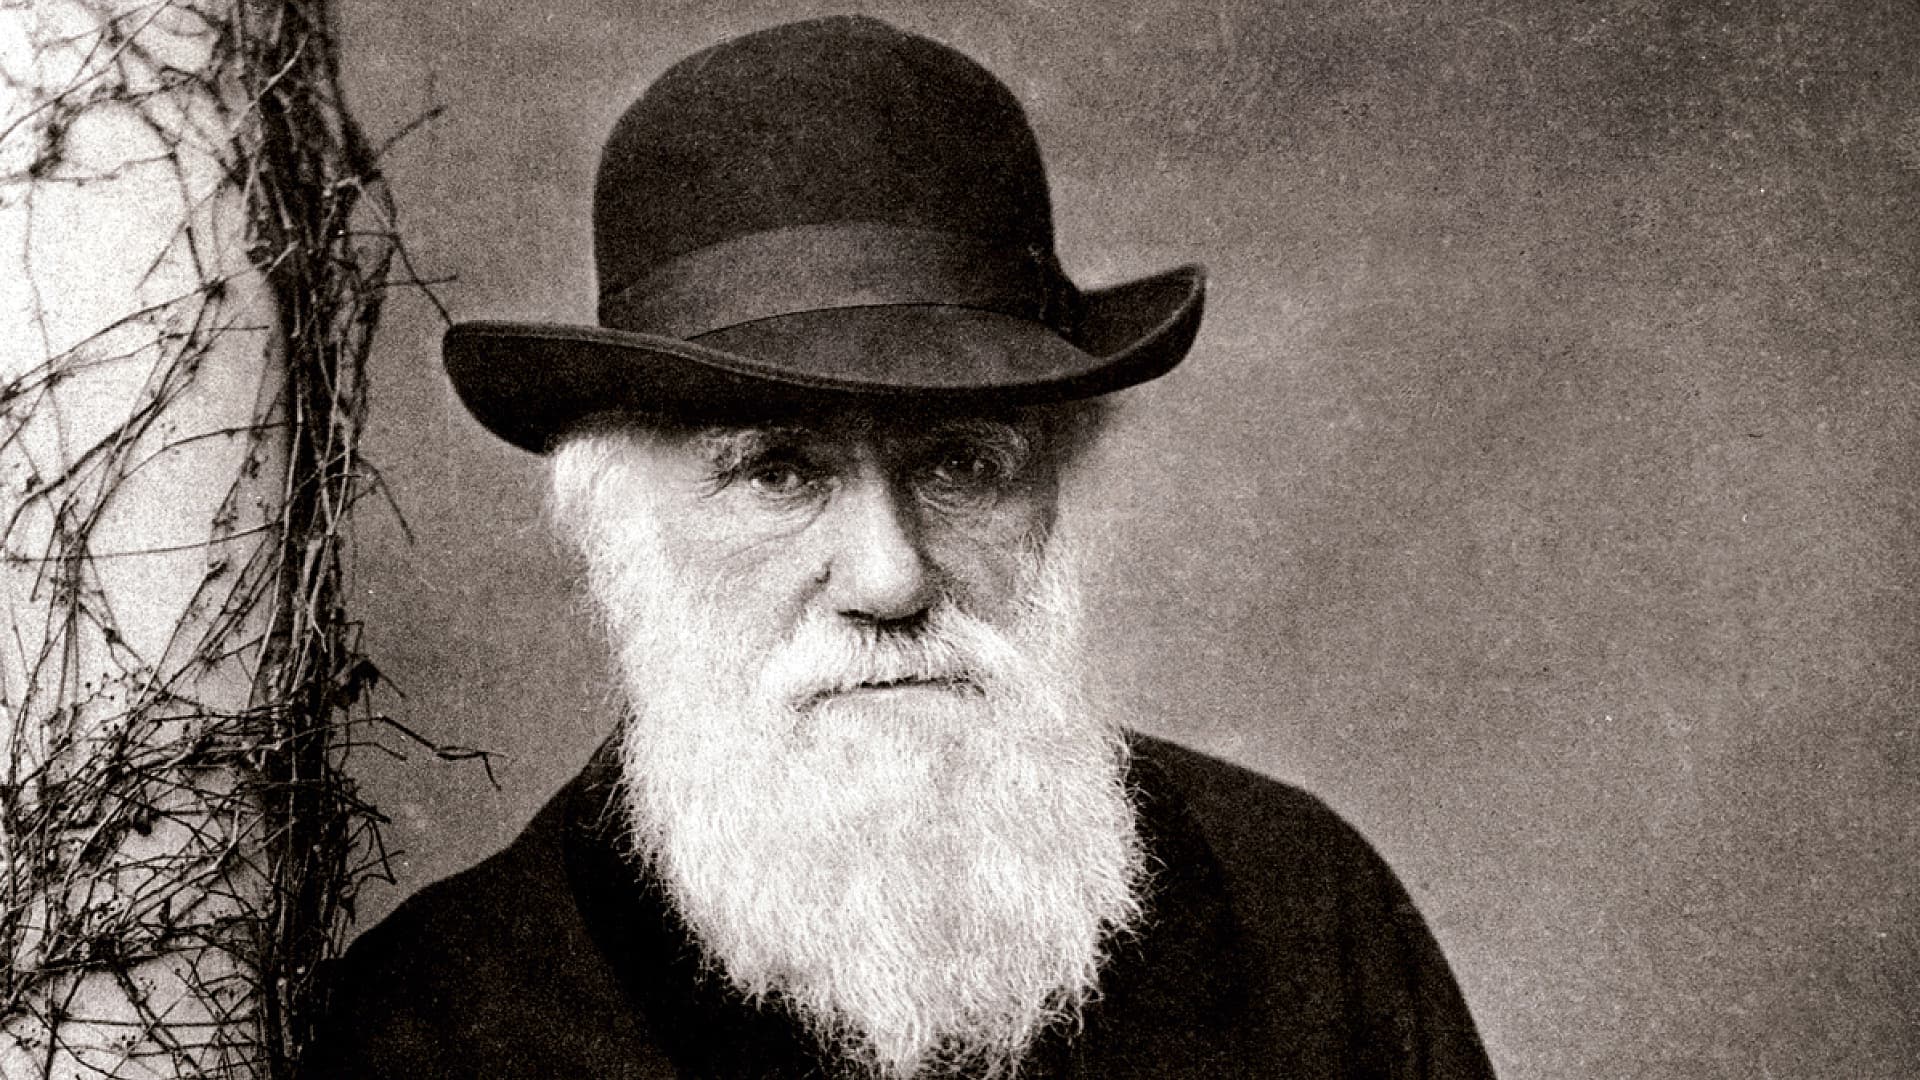 Should Darwin's theory of evolution be modified?